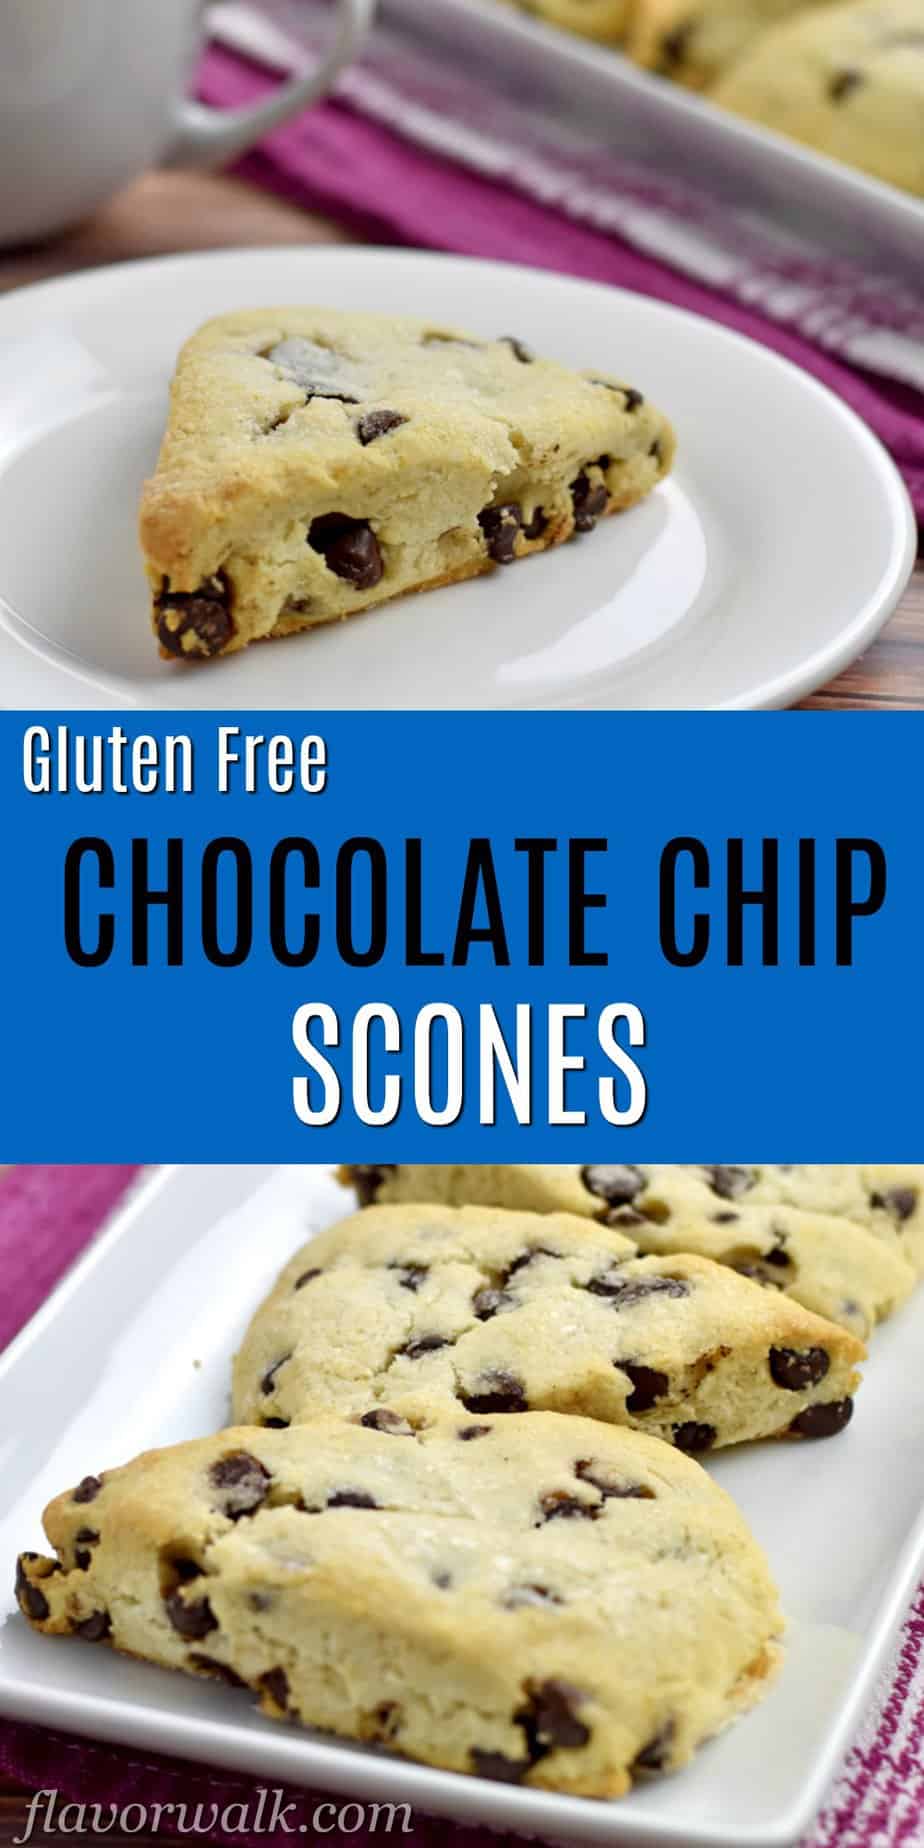 Top image is 1 gluten free chocolate chip scone on white plate with more scones and white coffee cup in background, bottom image is 3 scones on white rectangular plate, and middle image is text overlay on blue background